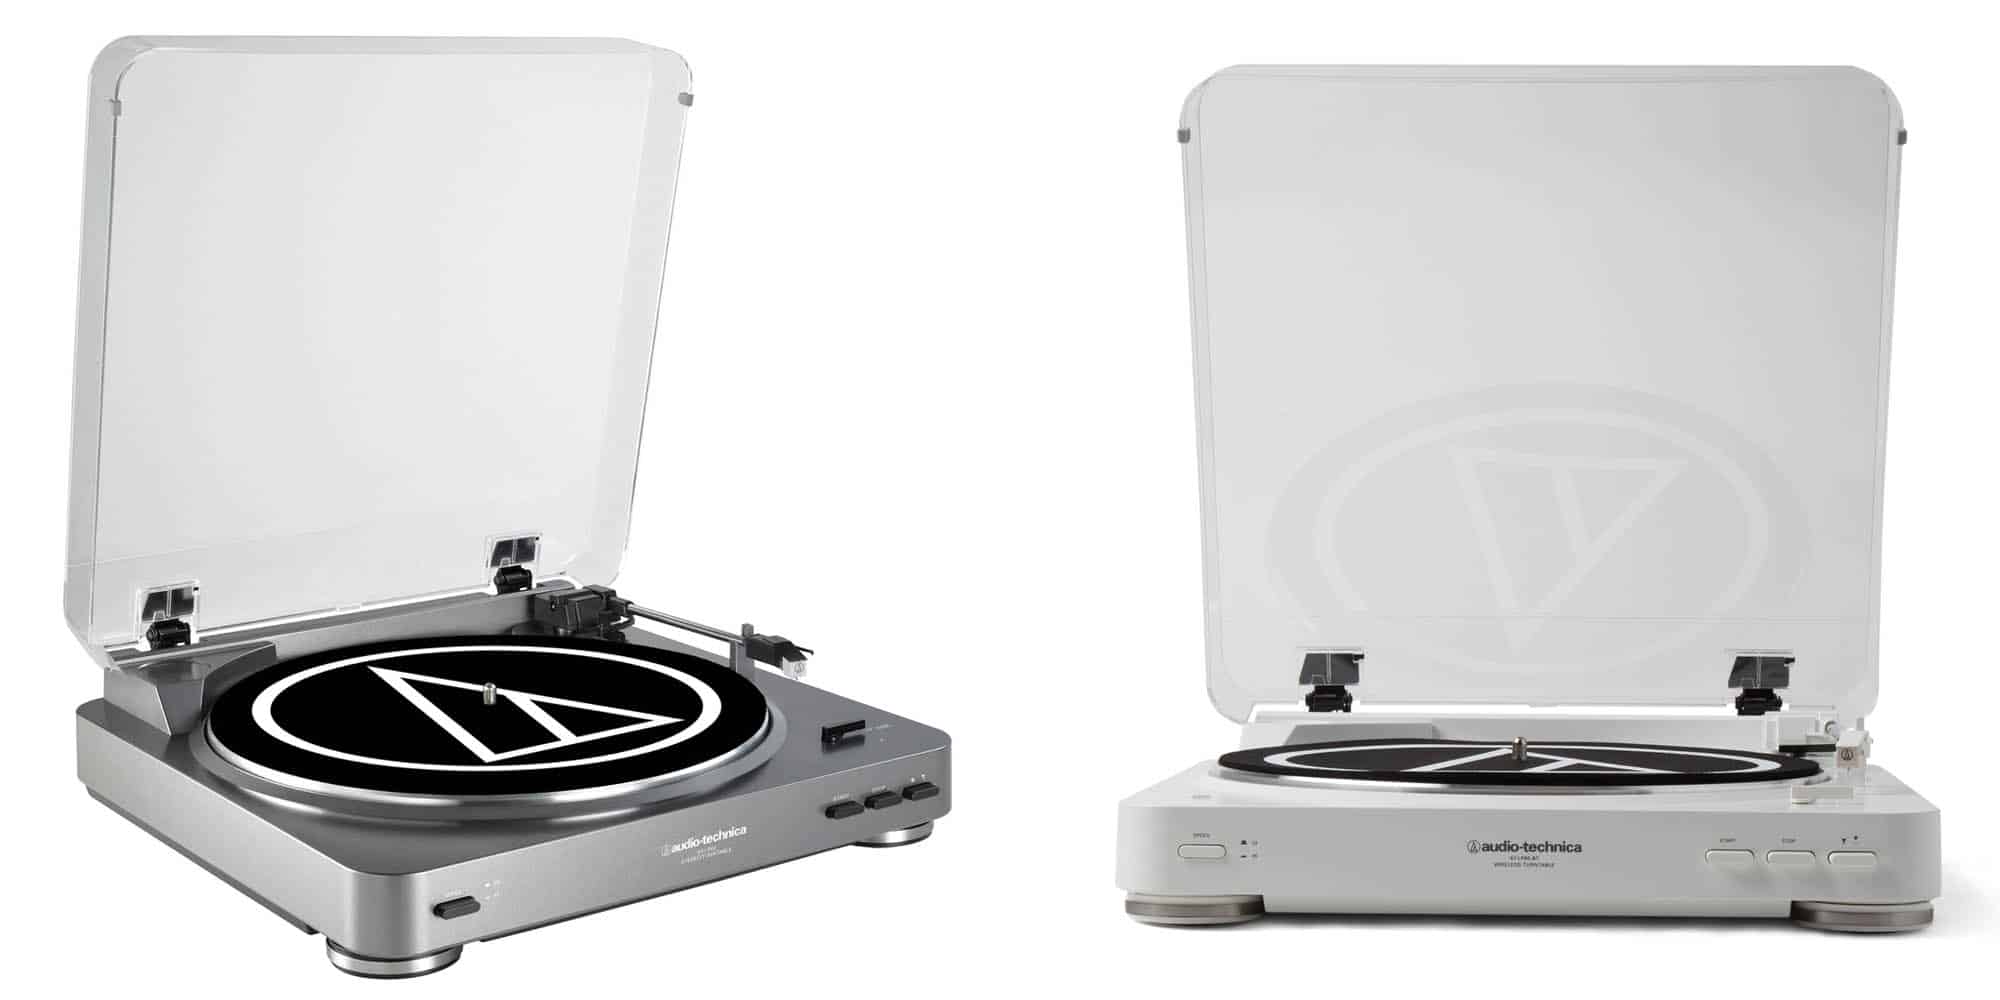 featured image for audio technica at-lp60 review